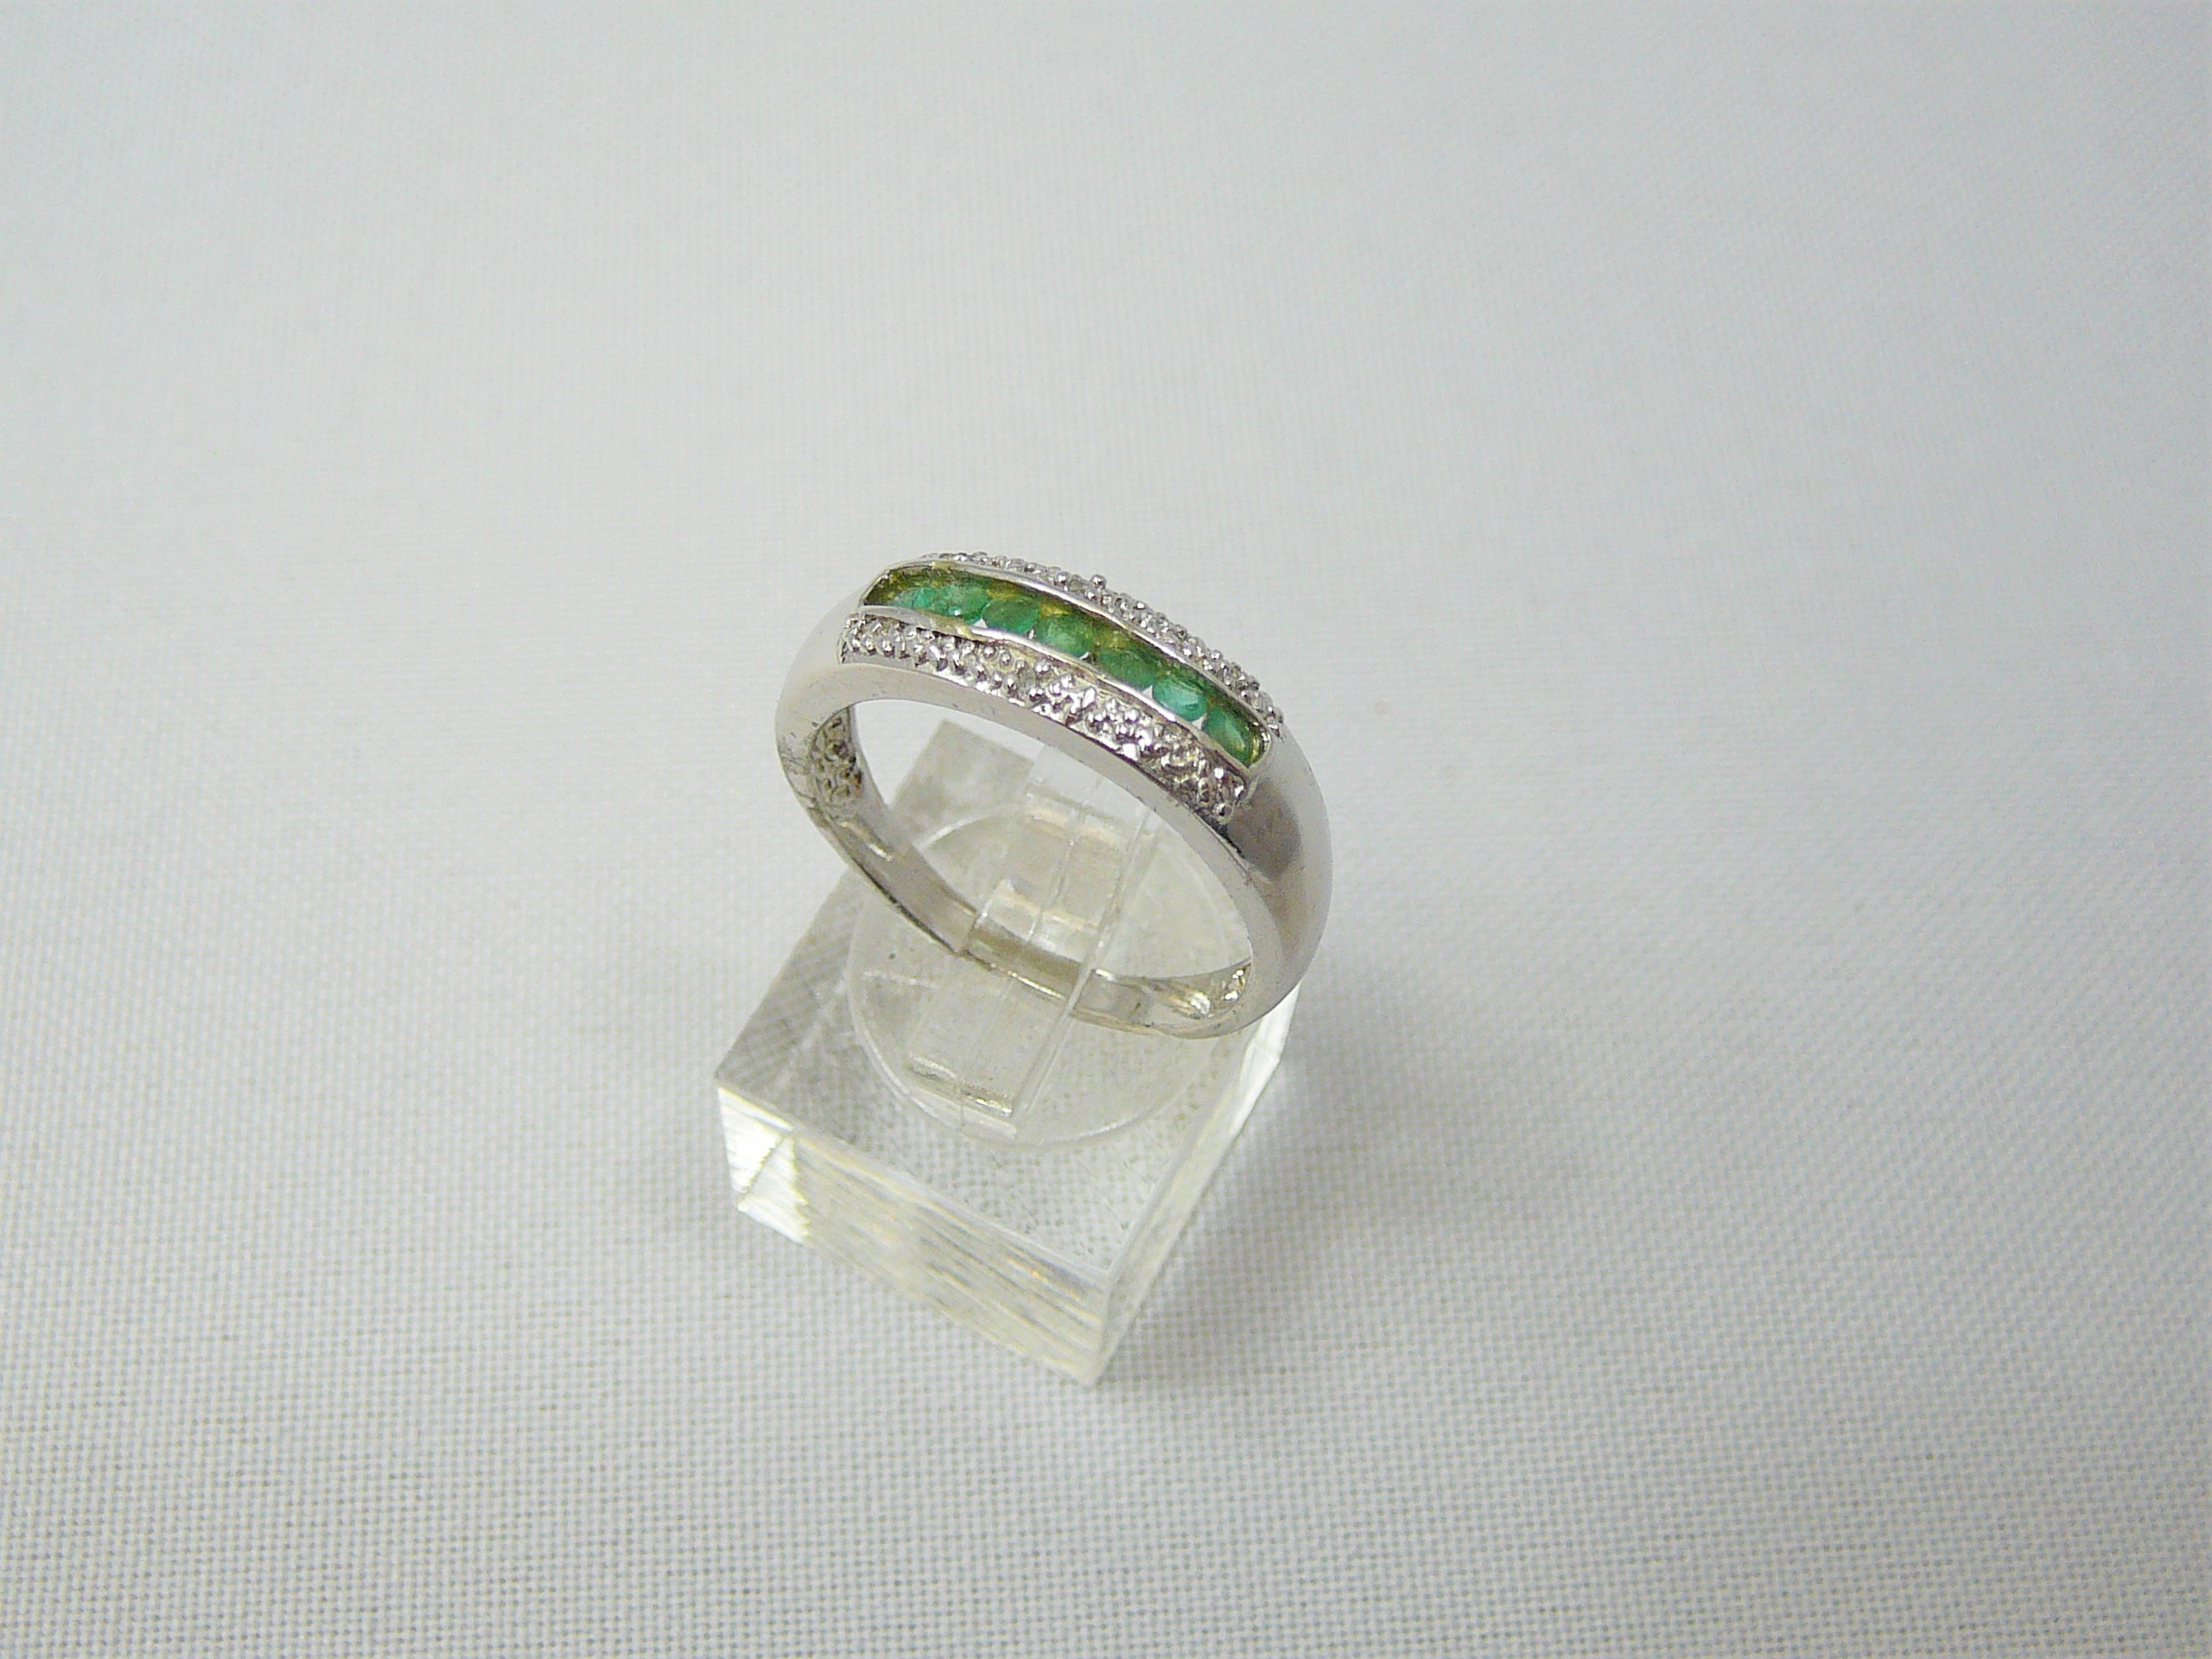 Silver emerald and diamond ring - Image 2 of 2